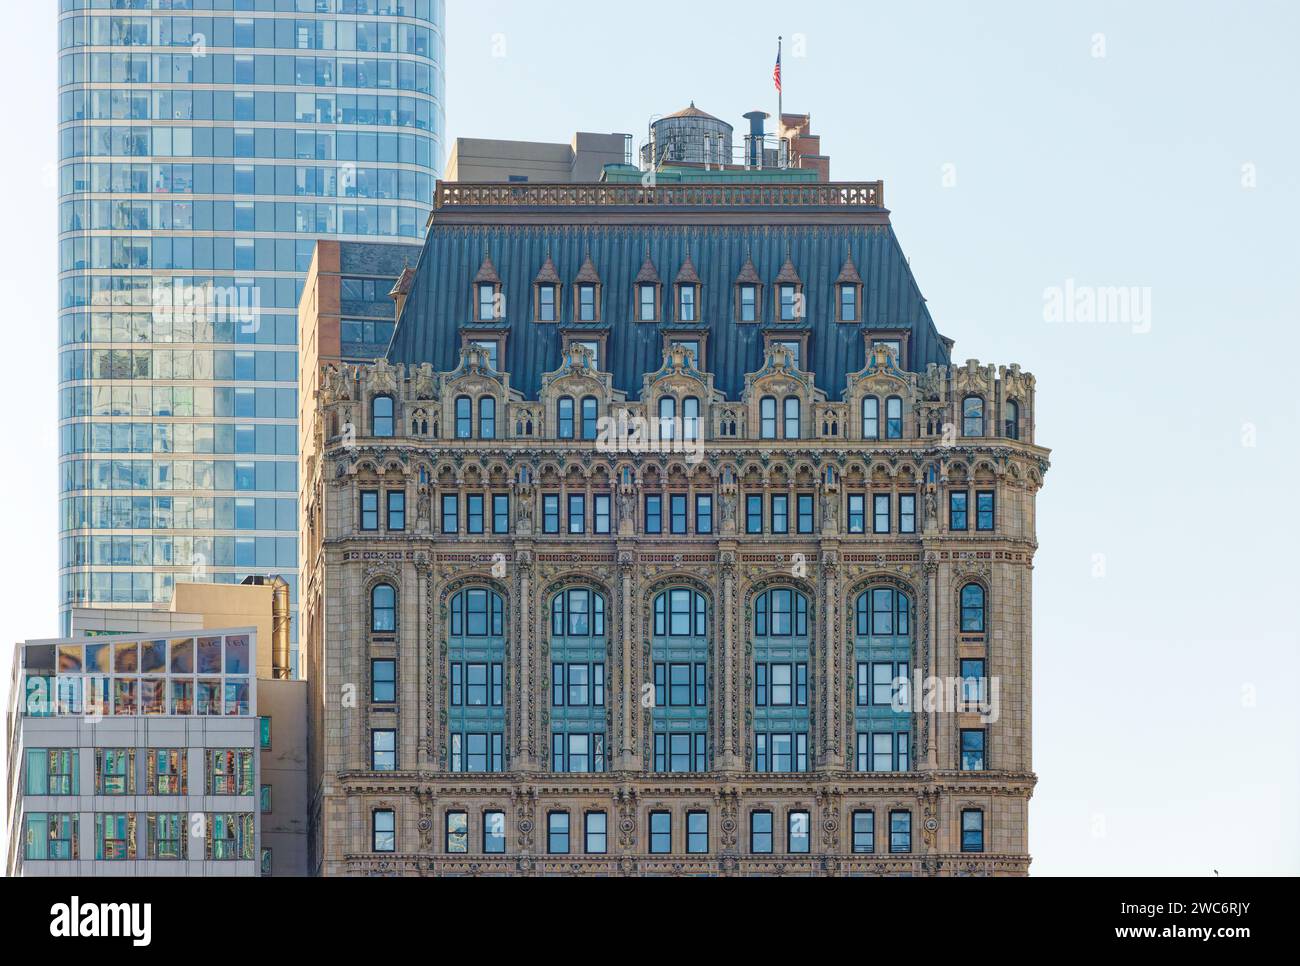 Cass Gilbert’s 90 West Street, richly embellished with polychrome terra cotta, restored after heavy 9/11 damage, converted to residential use. Stock Photo